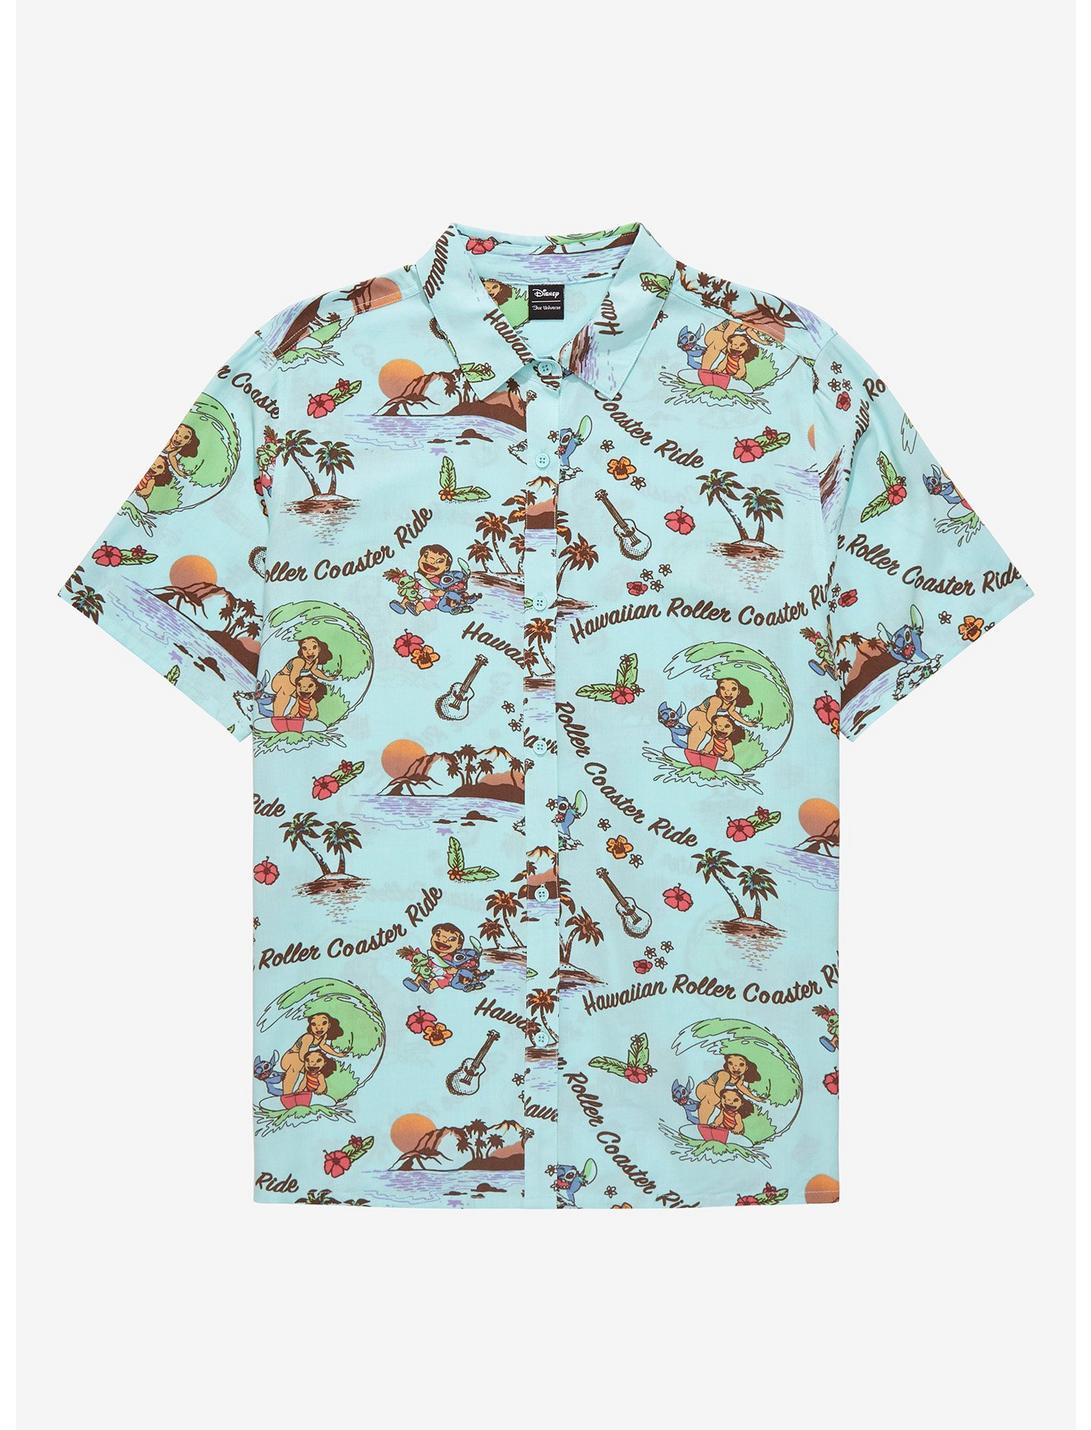 Our Universe Disney Lilo & Stitch Hawaiian Roller Coaster Ride Woven Button-Up, LIGHT BLUE, hi-res